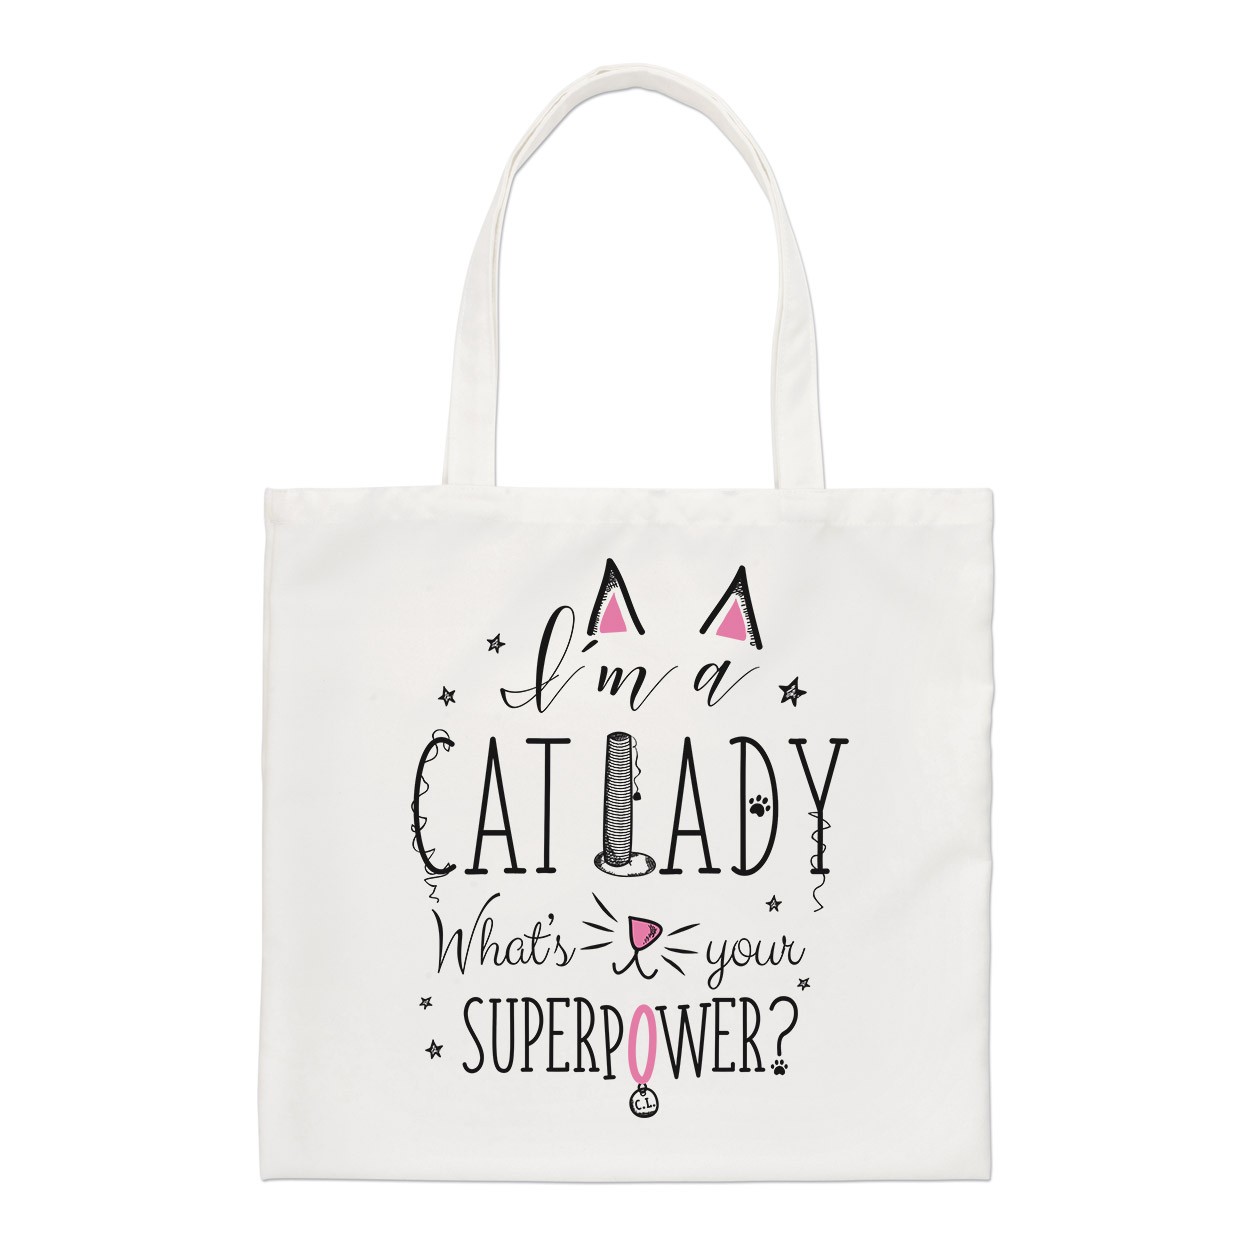 I'm A Cat Lady What's Your Superpower Regular Tote Bag